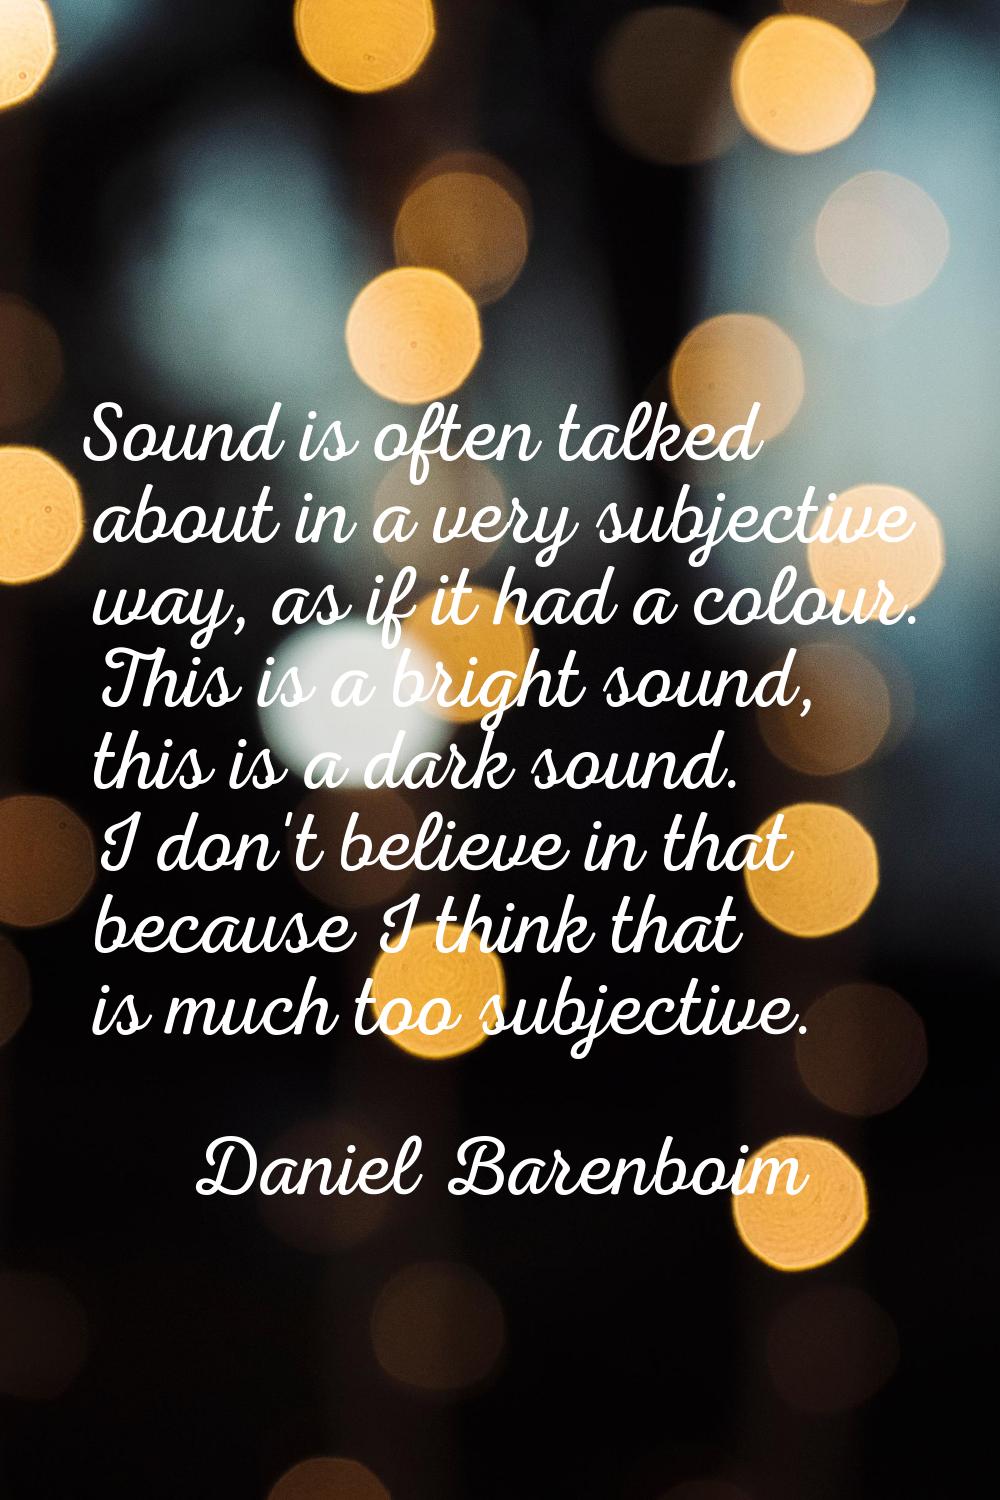 Sound is often talked about in a very subjective way, as if it had a colour. This is a bright sound